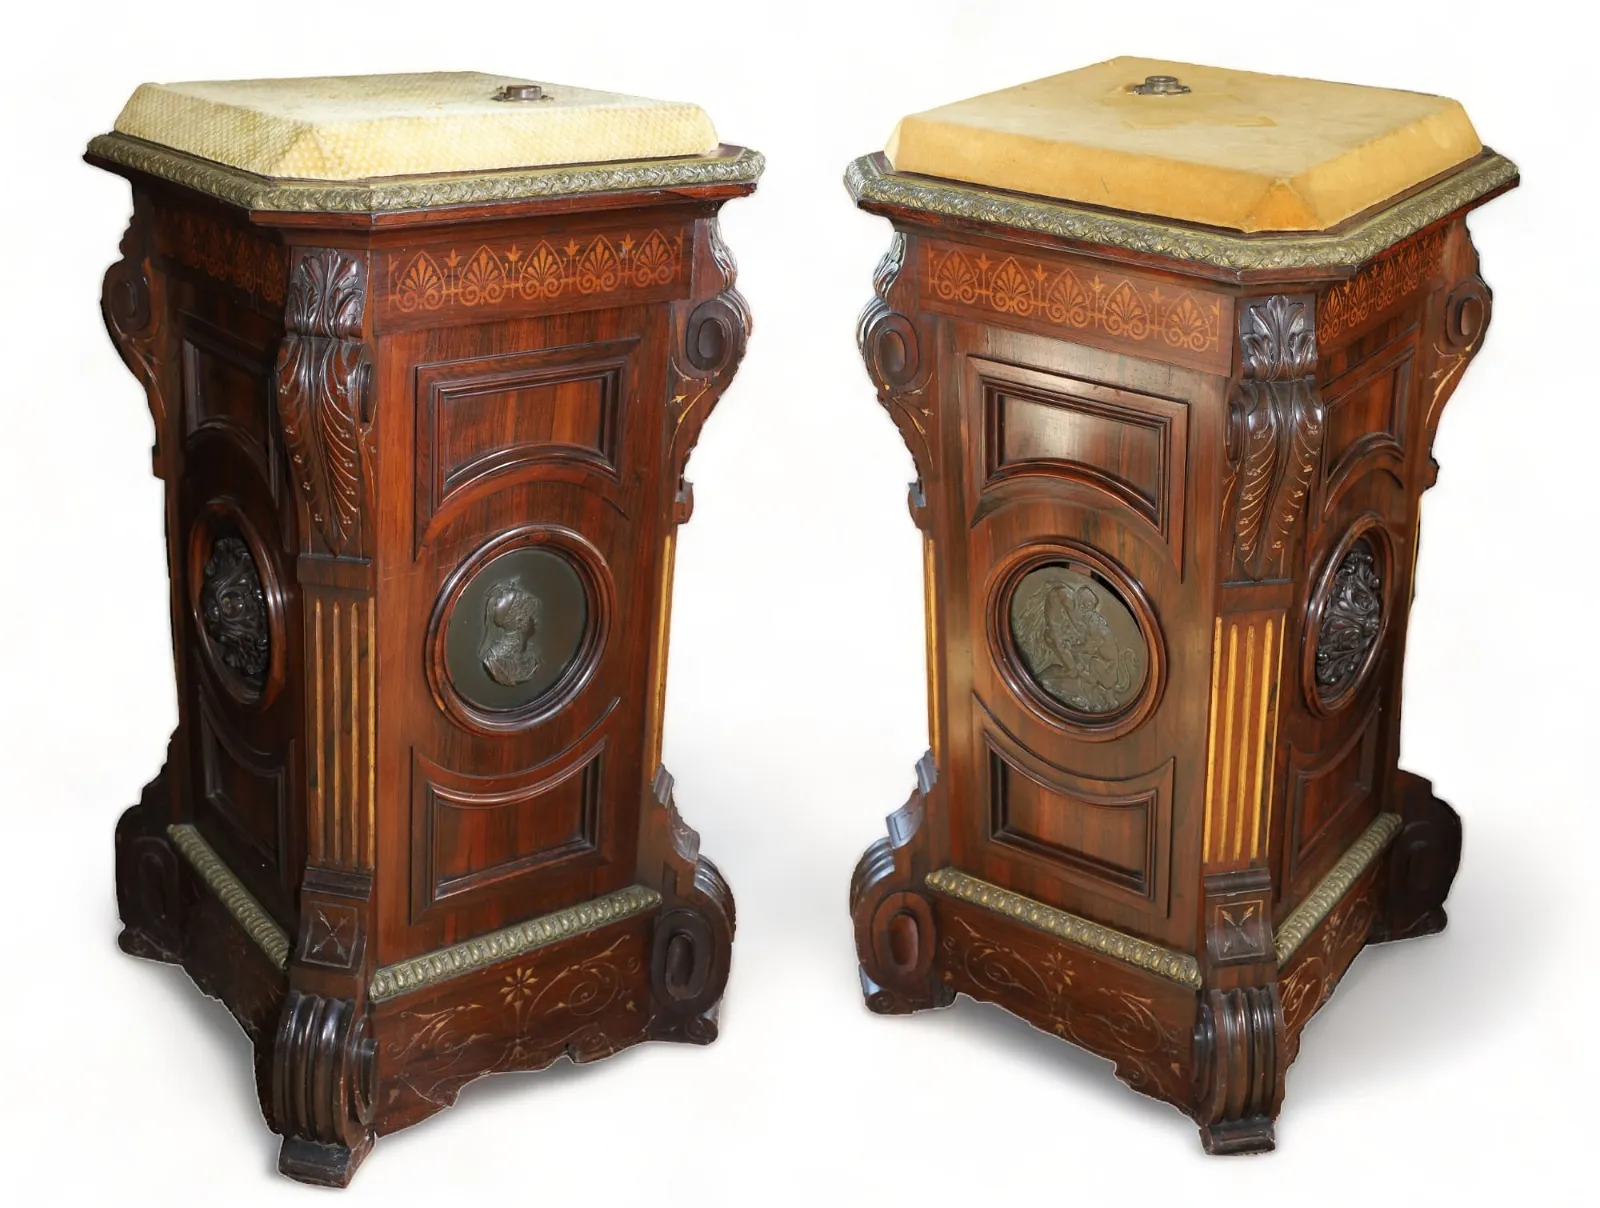 Pair of American Renaissance rosewood pedestals, which sold for $30,000 ($38,700 with buyer’s premium) at DuMouchelles.